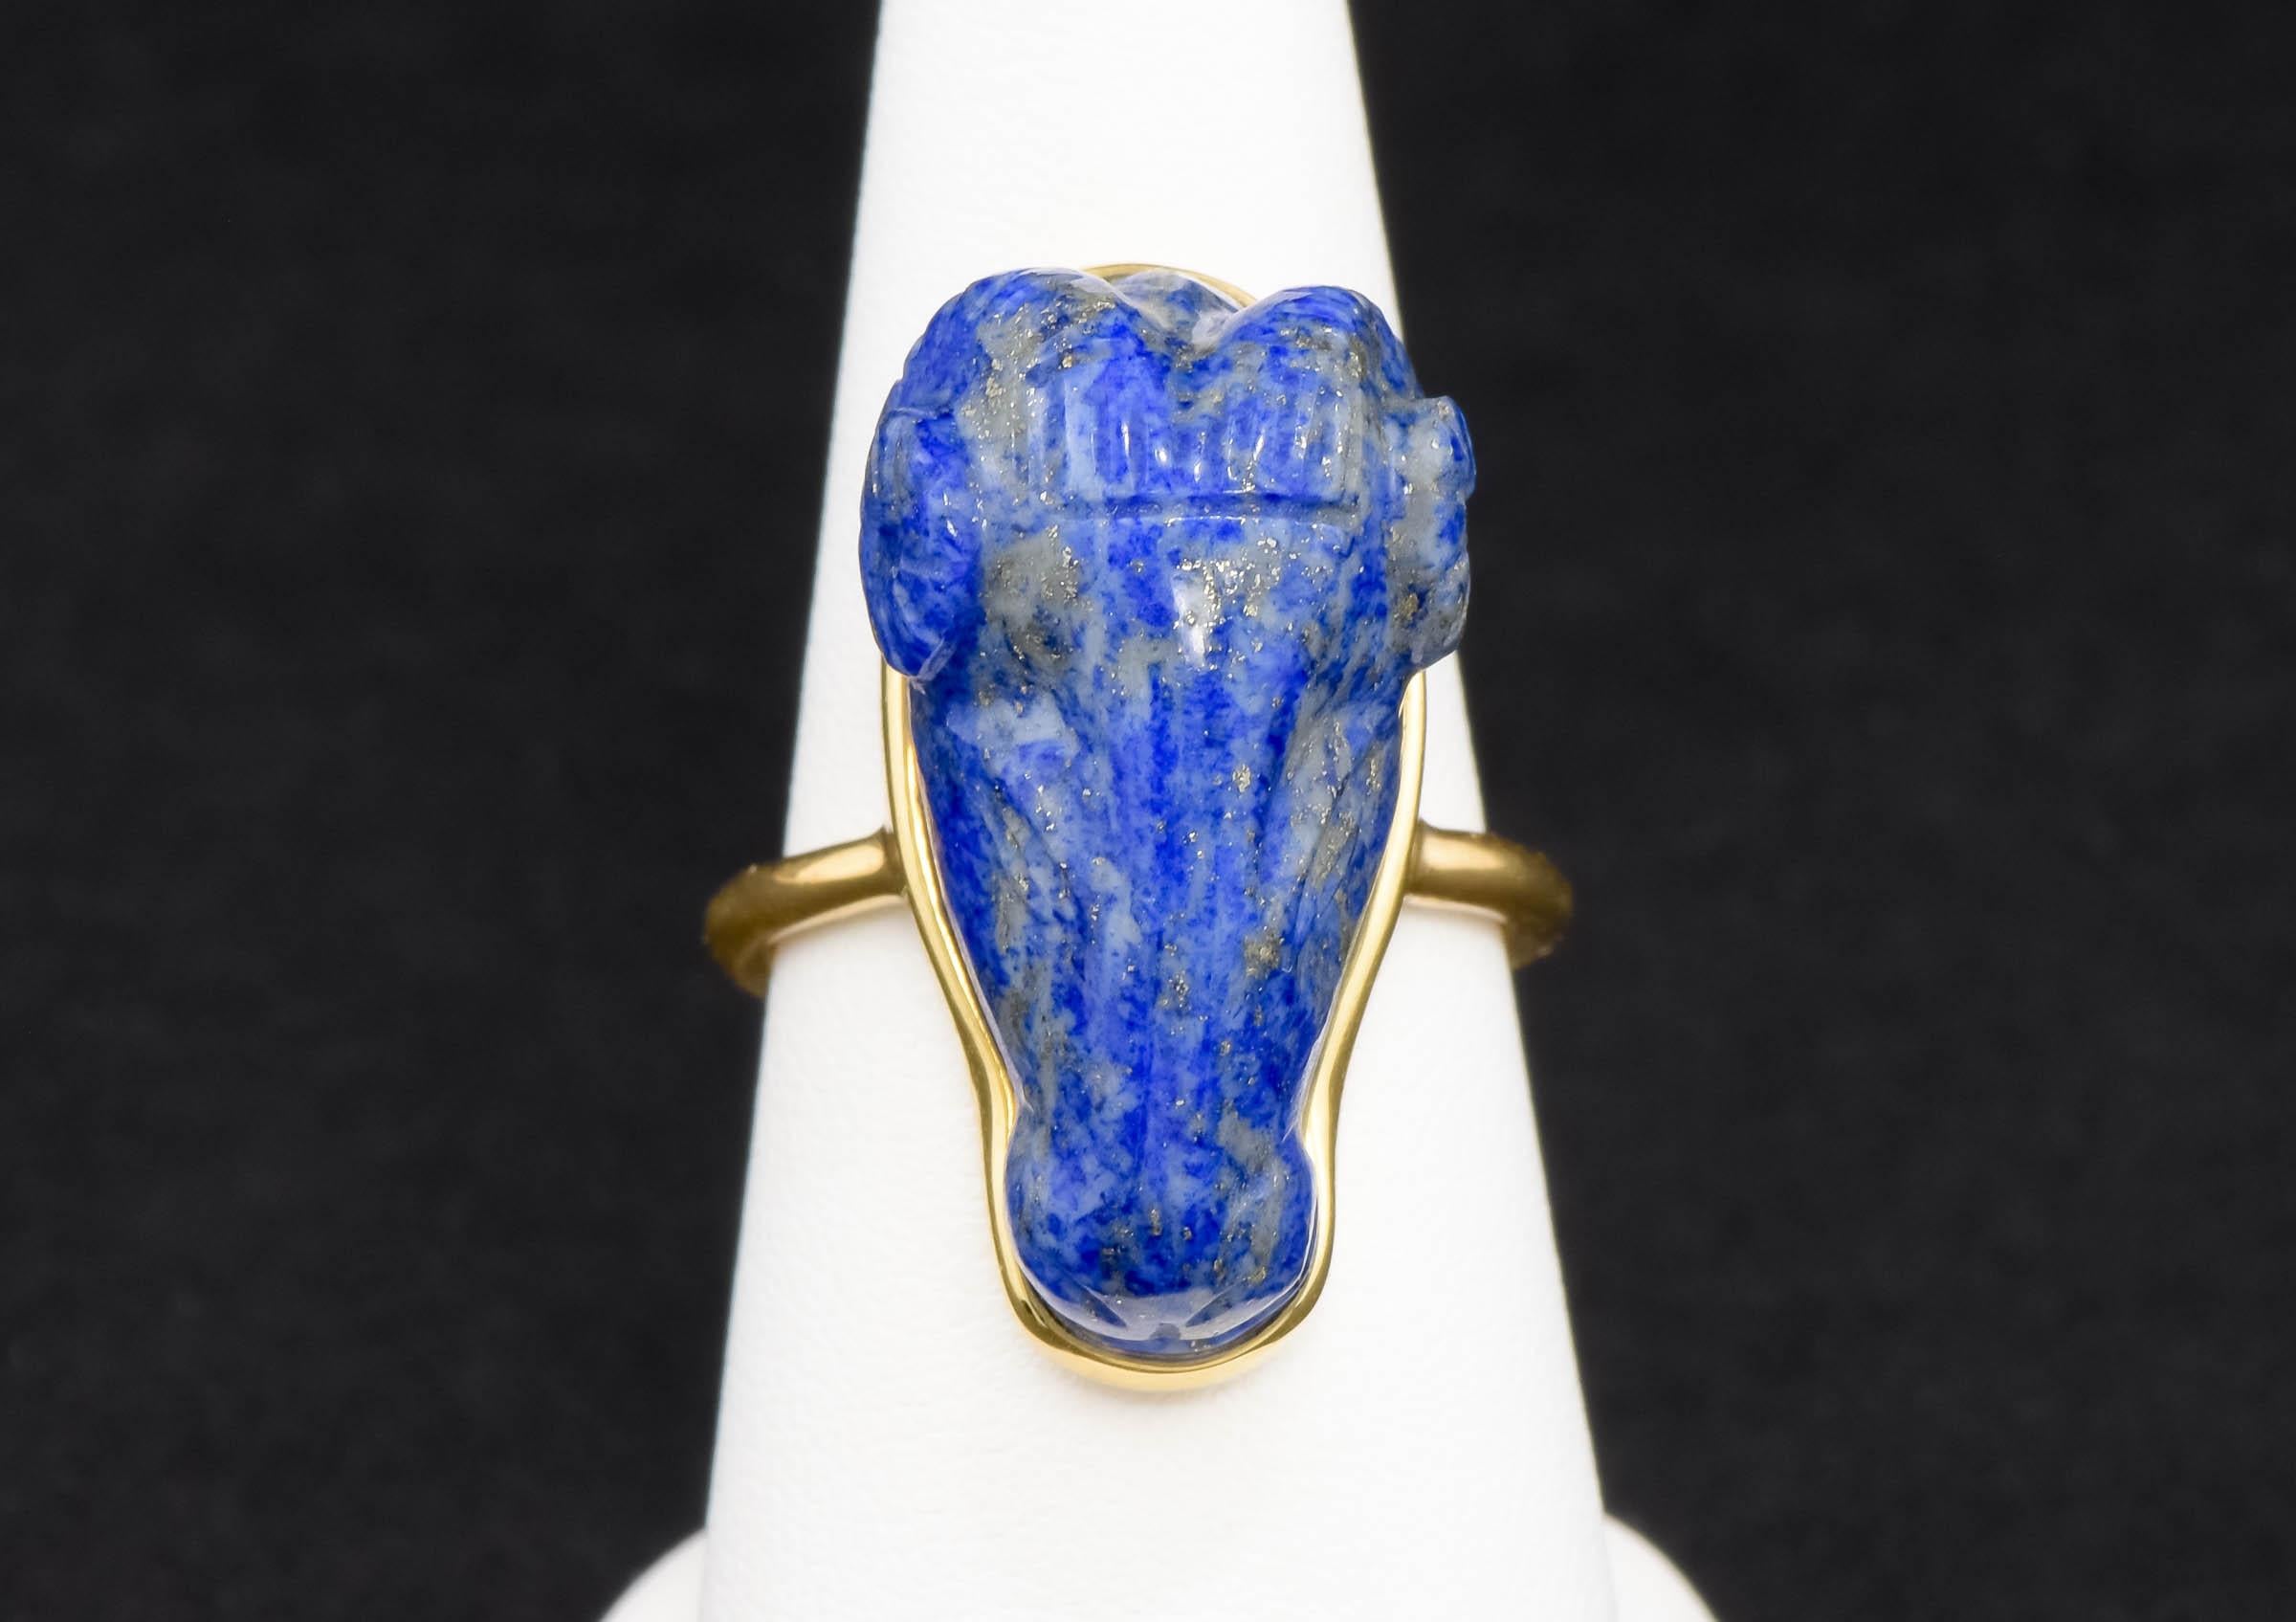 With a definite nod to the ancient use of the Ram's head for adornment, this striking vintage carved Lapis Lazuli and 18K gold ring makes a big, beautiful statement when worn.

Crafted of 18K yellow gold, the ring is set with a large and substantial